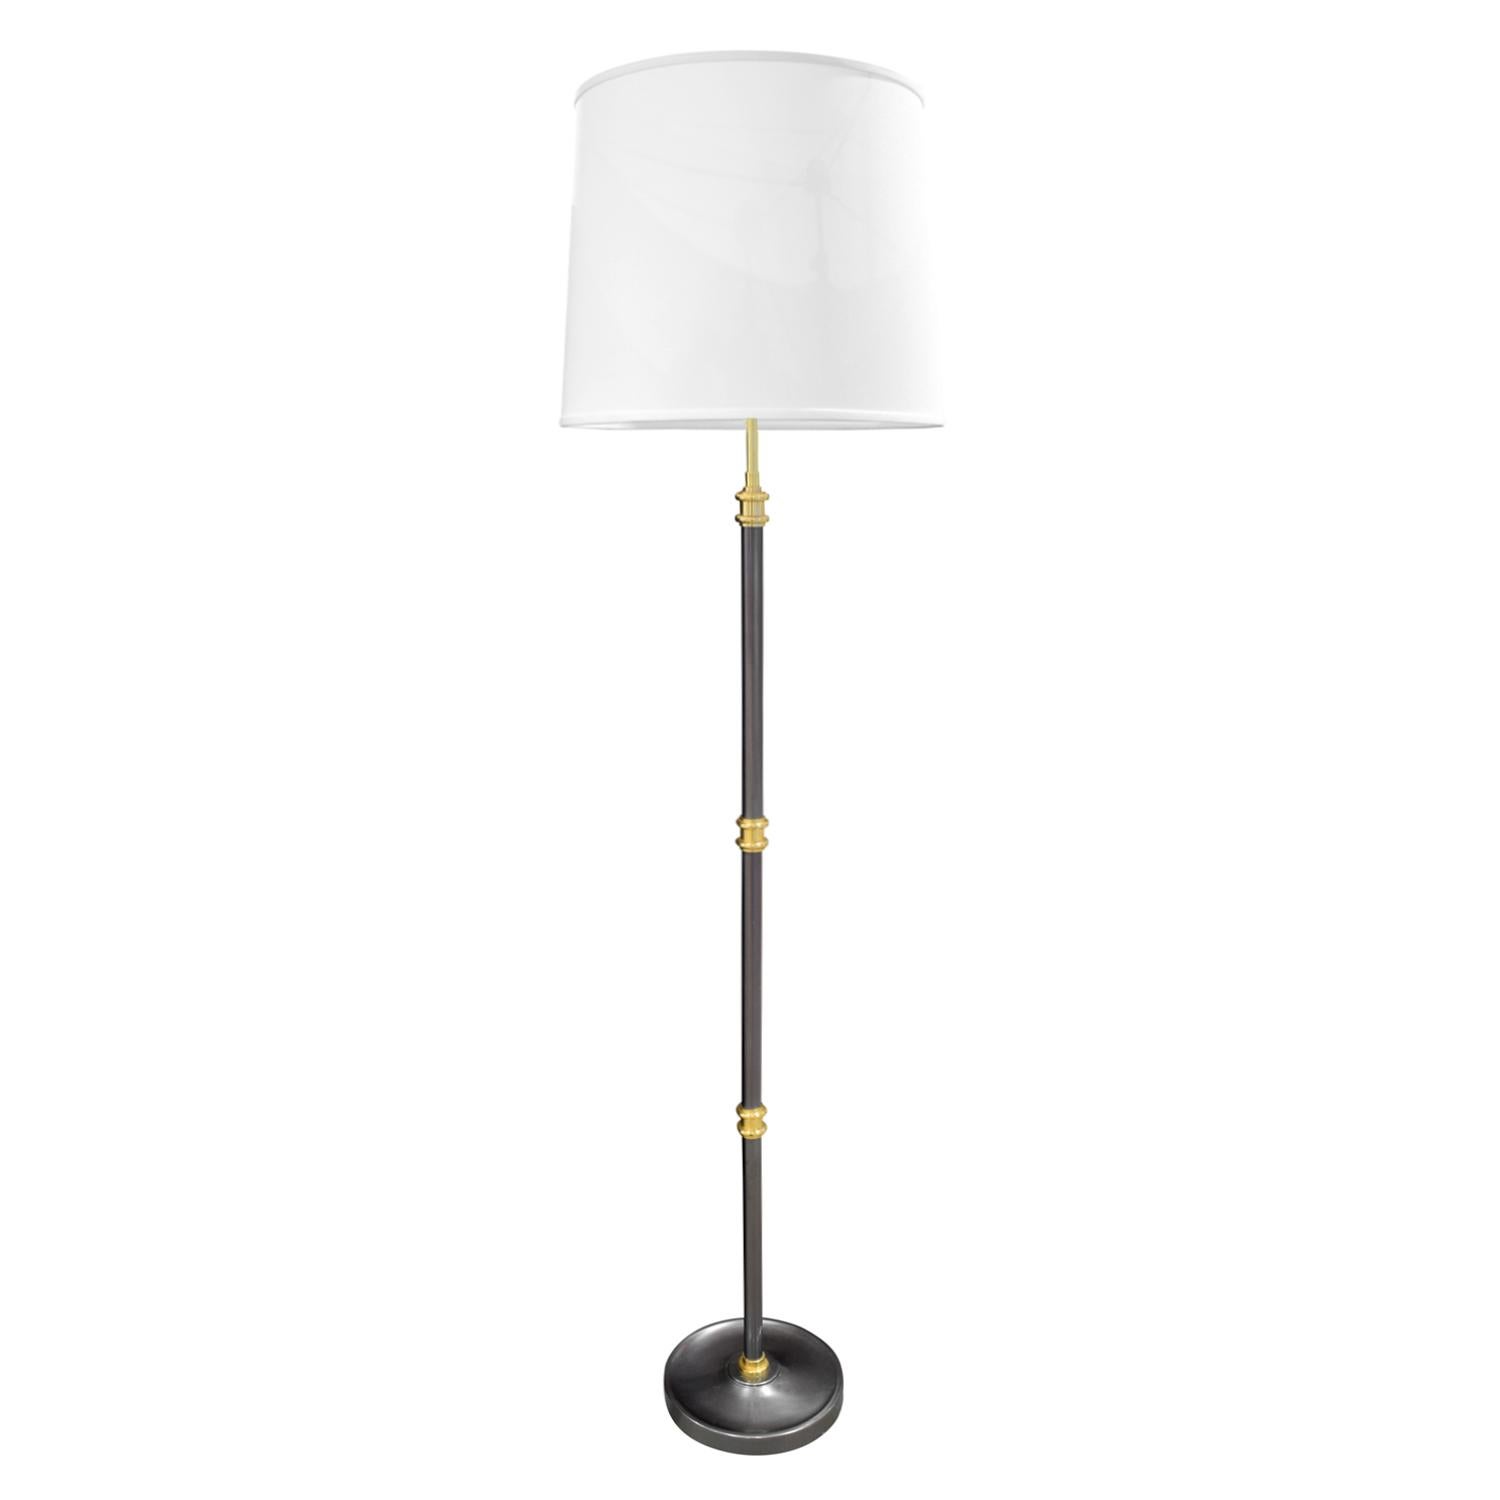 Elegant floor lamp in gunmetal with polished brass accents and ball feet in the manner of Jansen, American 1980's.  This lamp is beautifully made.  It has been rewired with new sockets.  Height is adjustable.  Metal has been polished and